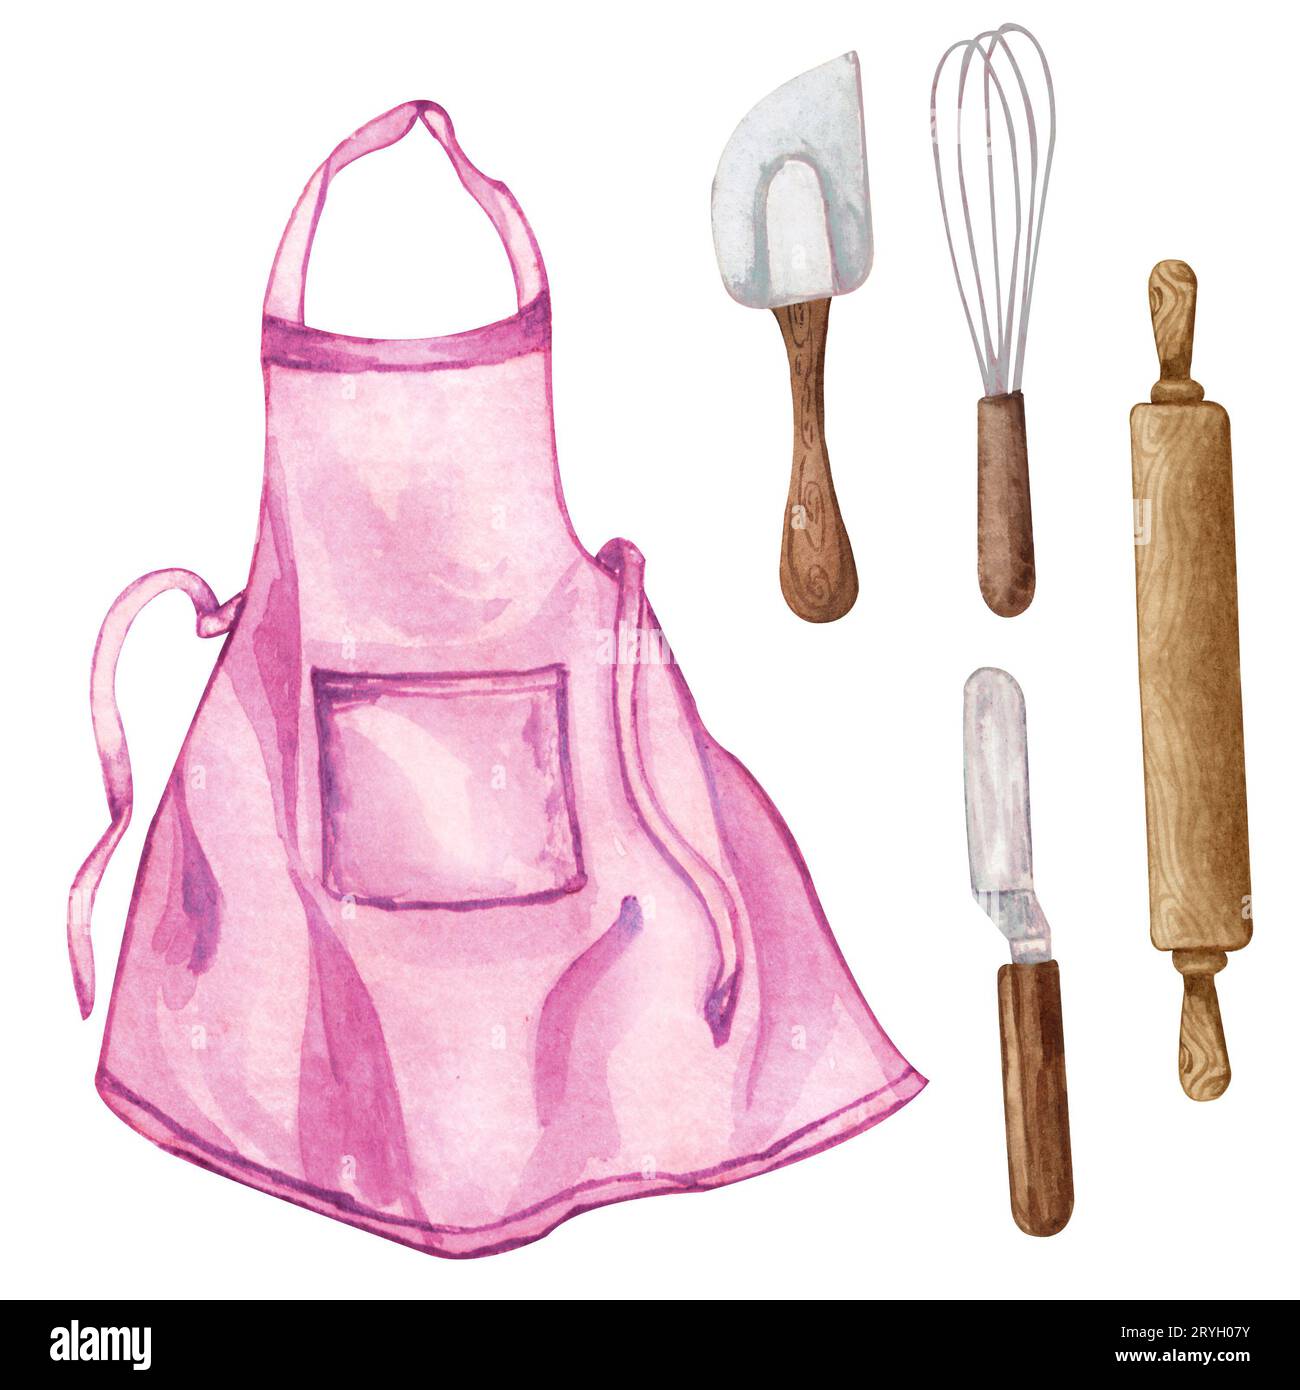 https://c8.alamy.com/comp/2RYH07Y/baking-watercolor-set-with-kitchen-utensils-mixer-chocolate-potholders-spoon-clay-jag-whisk-on-white-background-cooking-c-2RYH07Y.jpg